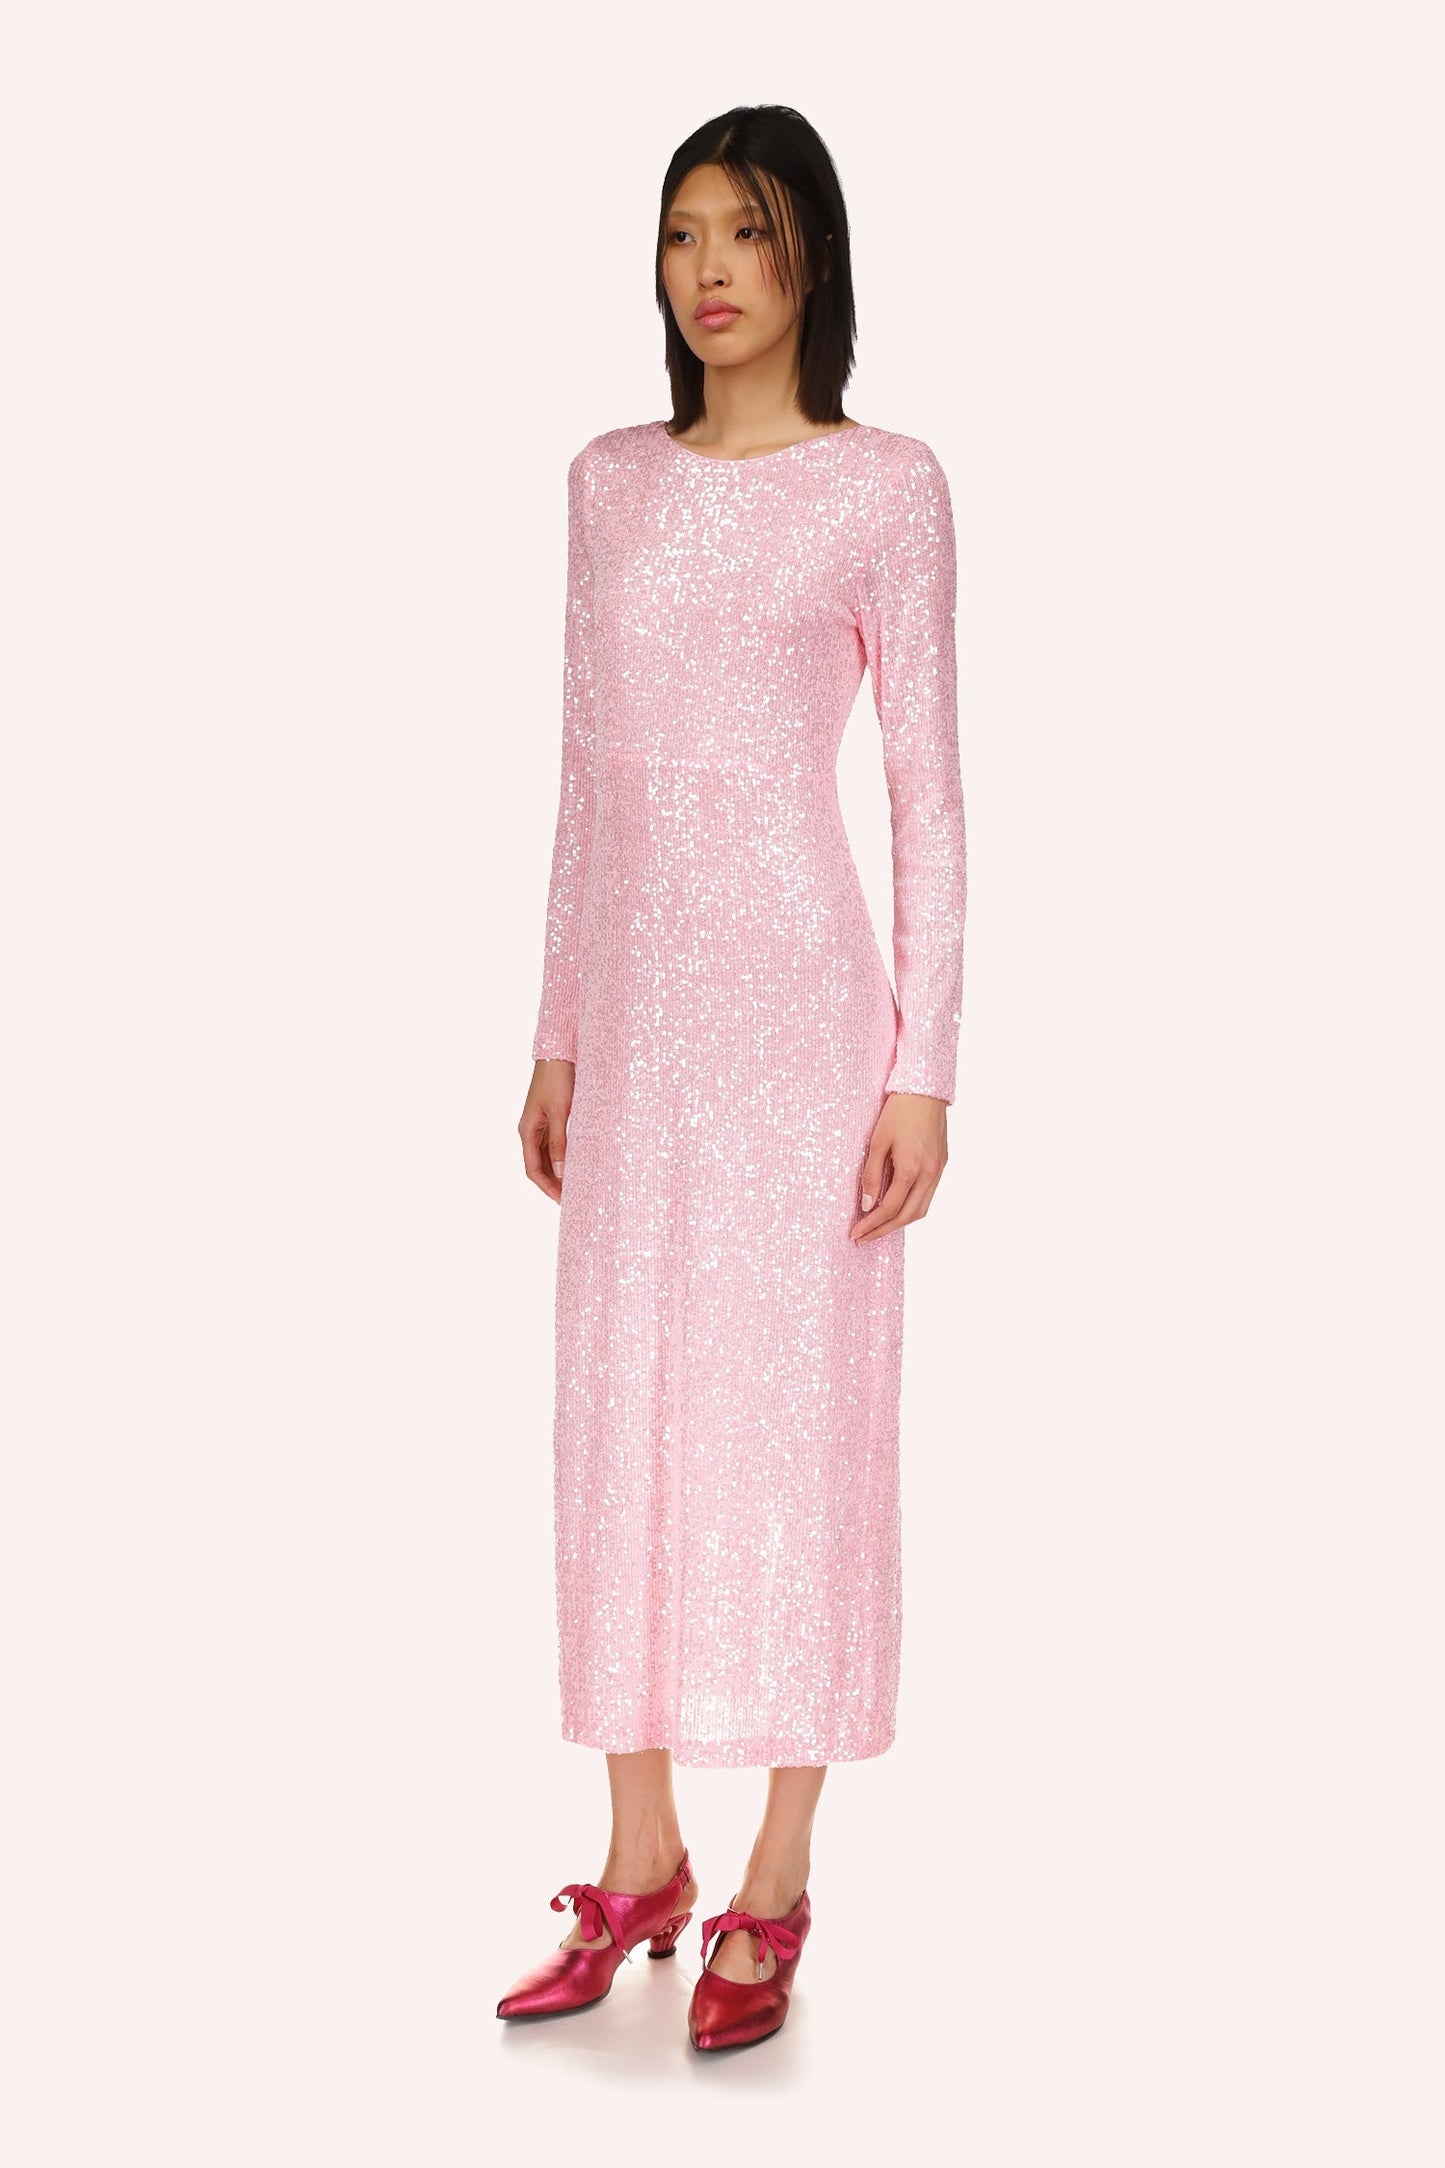 Sequin Mesh mid-calf long designed by Anna Sui, is a sophisticated gown in a soft baby pink color